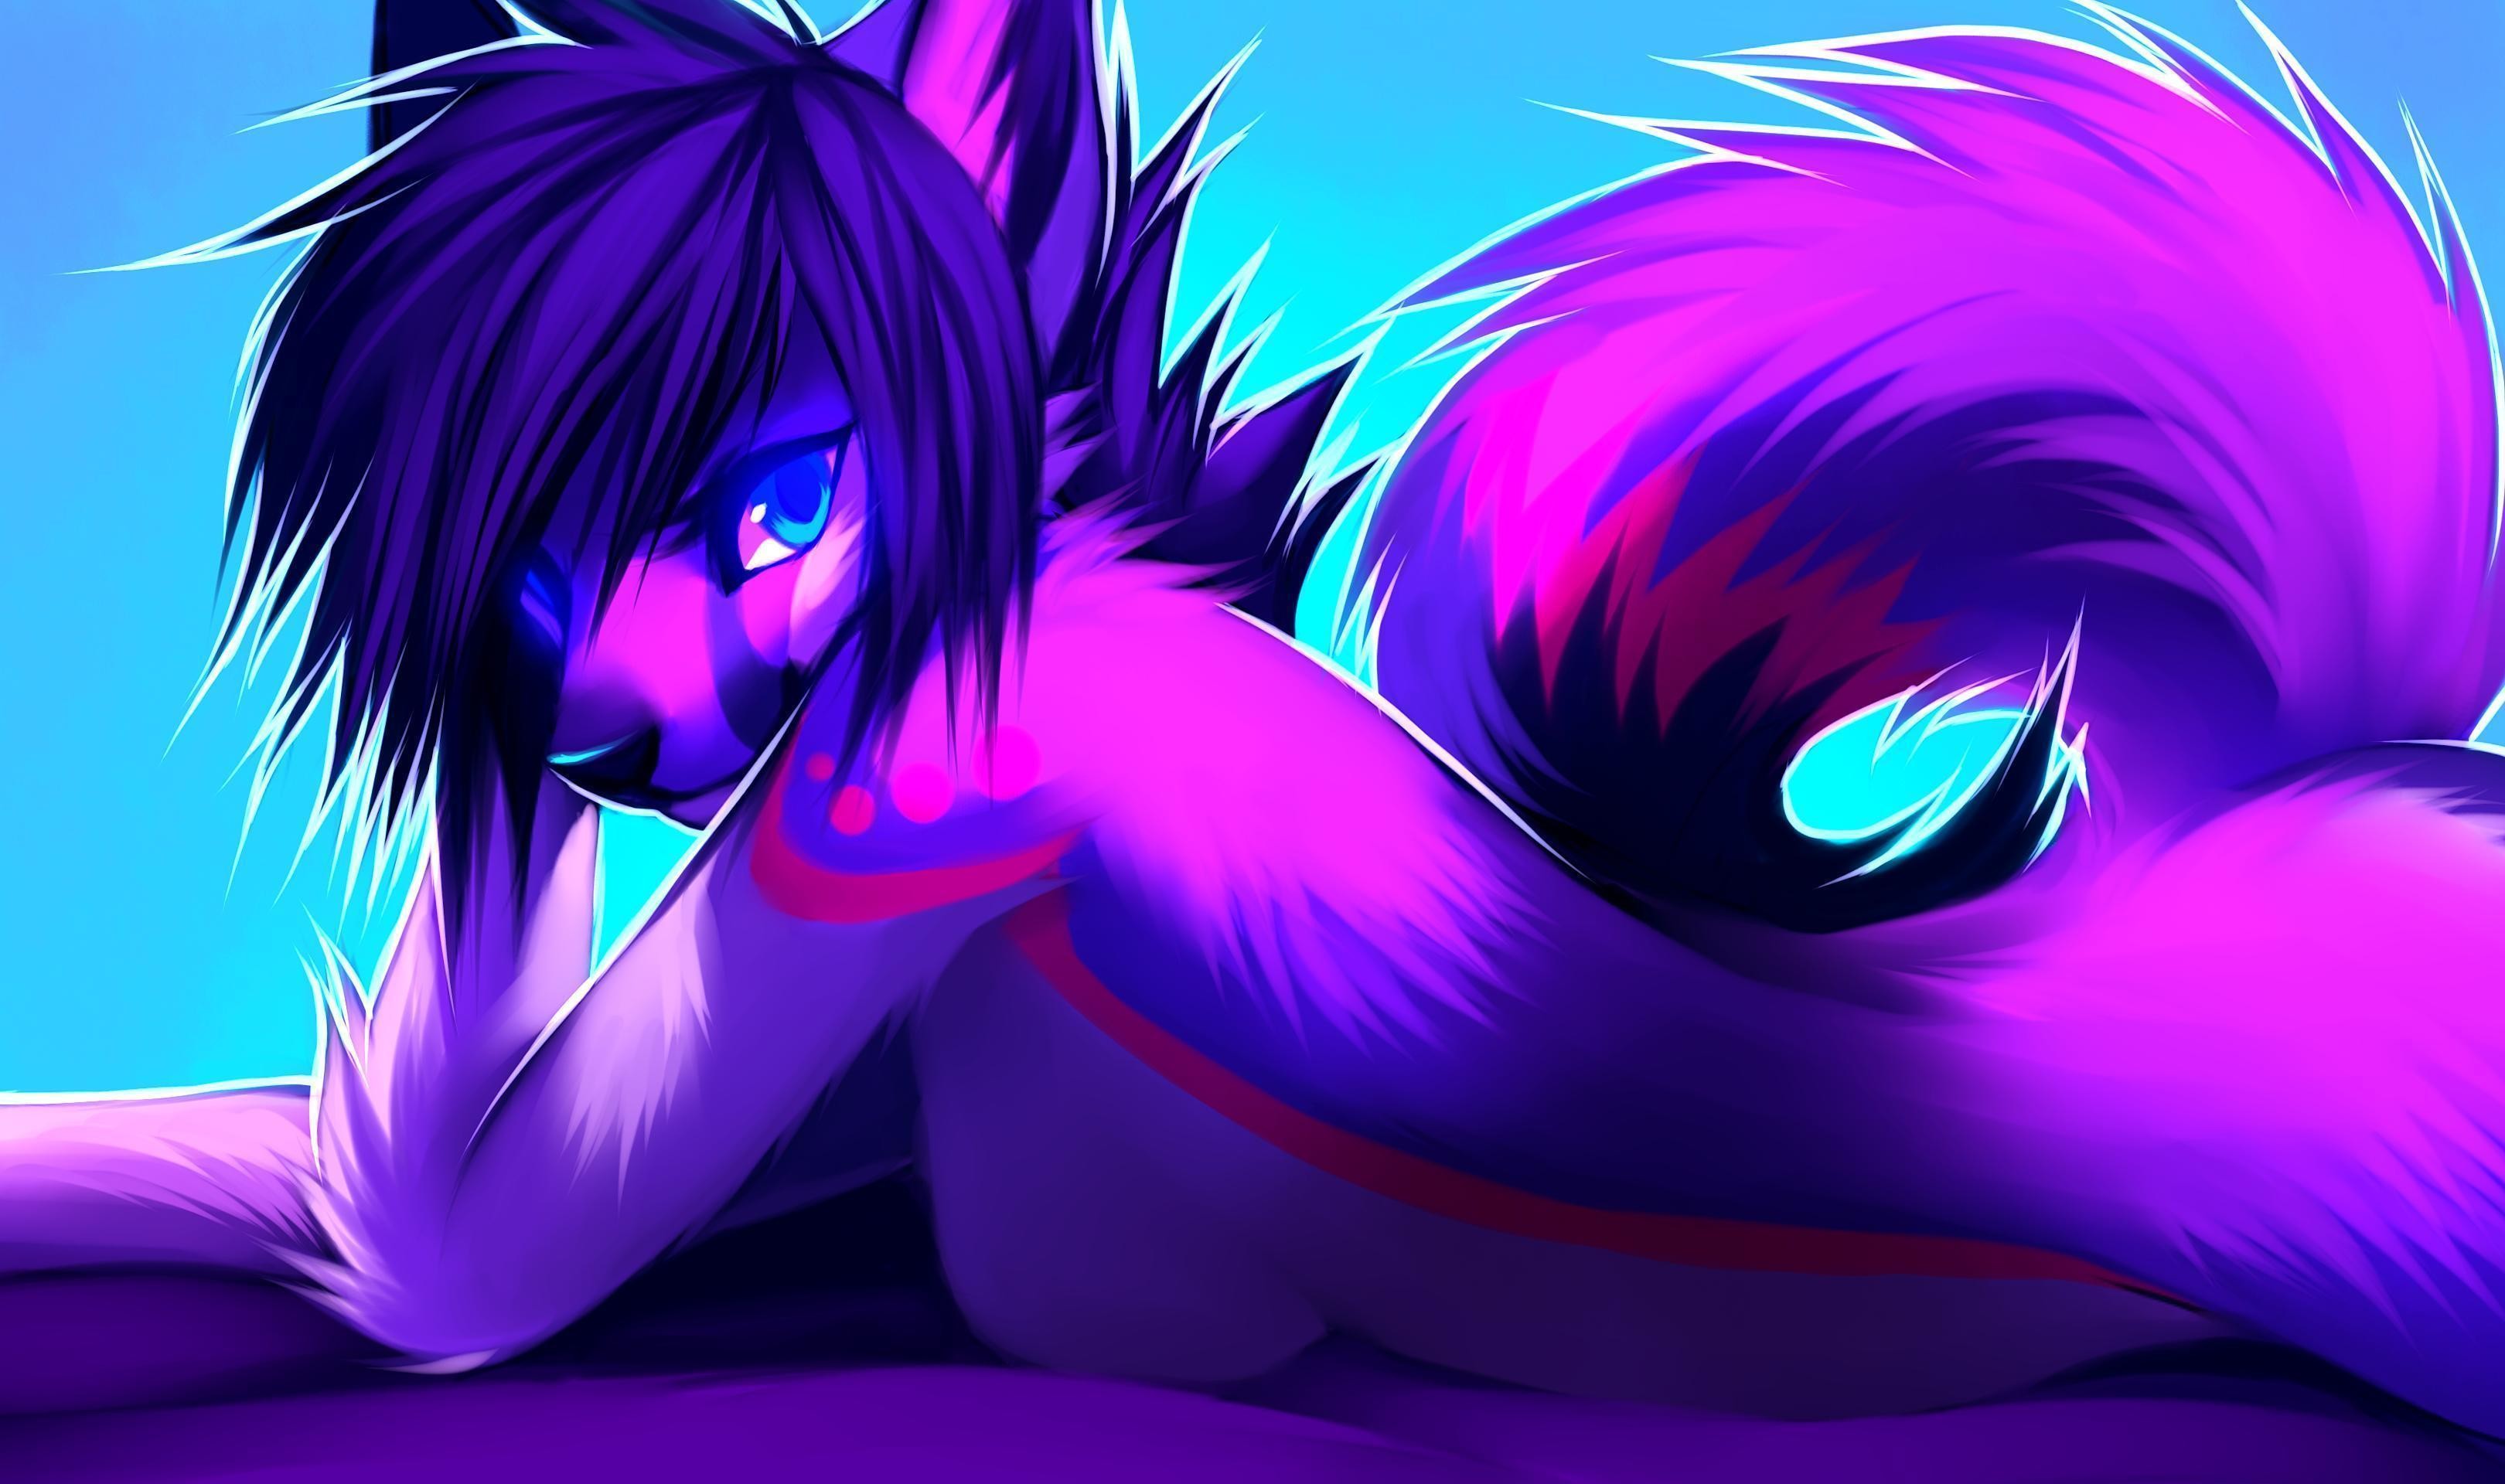 3240x1920 Furry Wallpapers | Wallpaper and Furry art